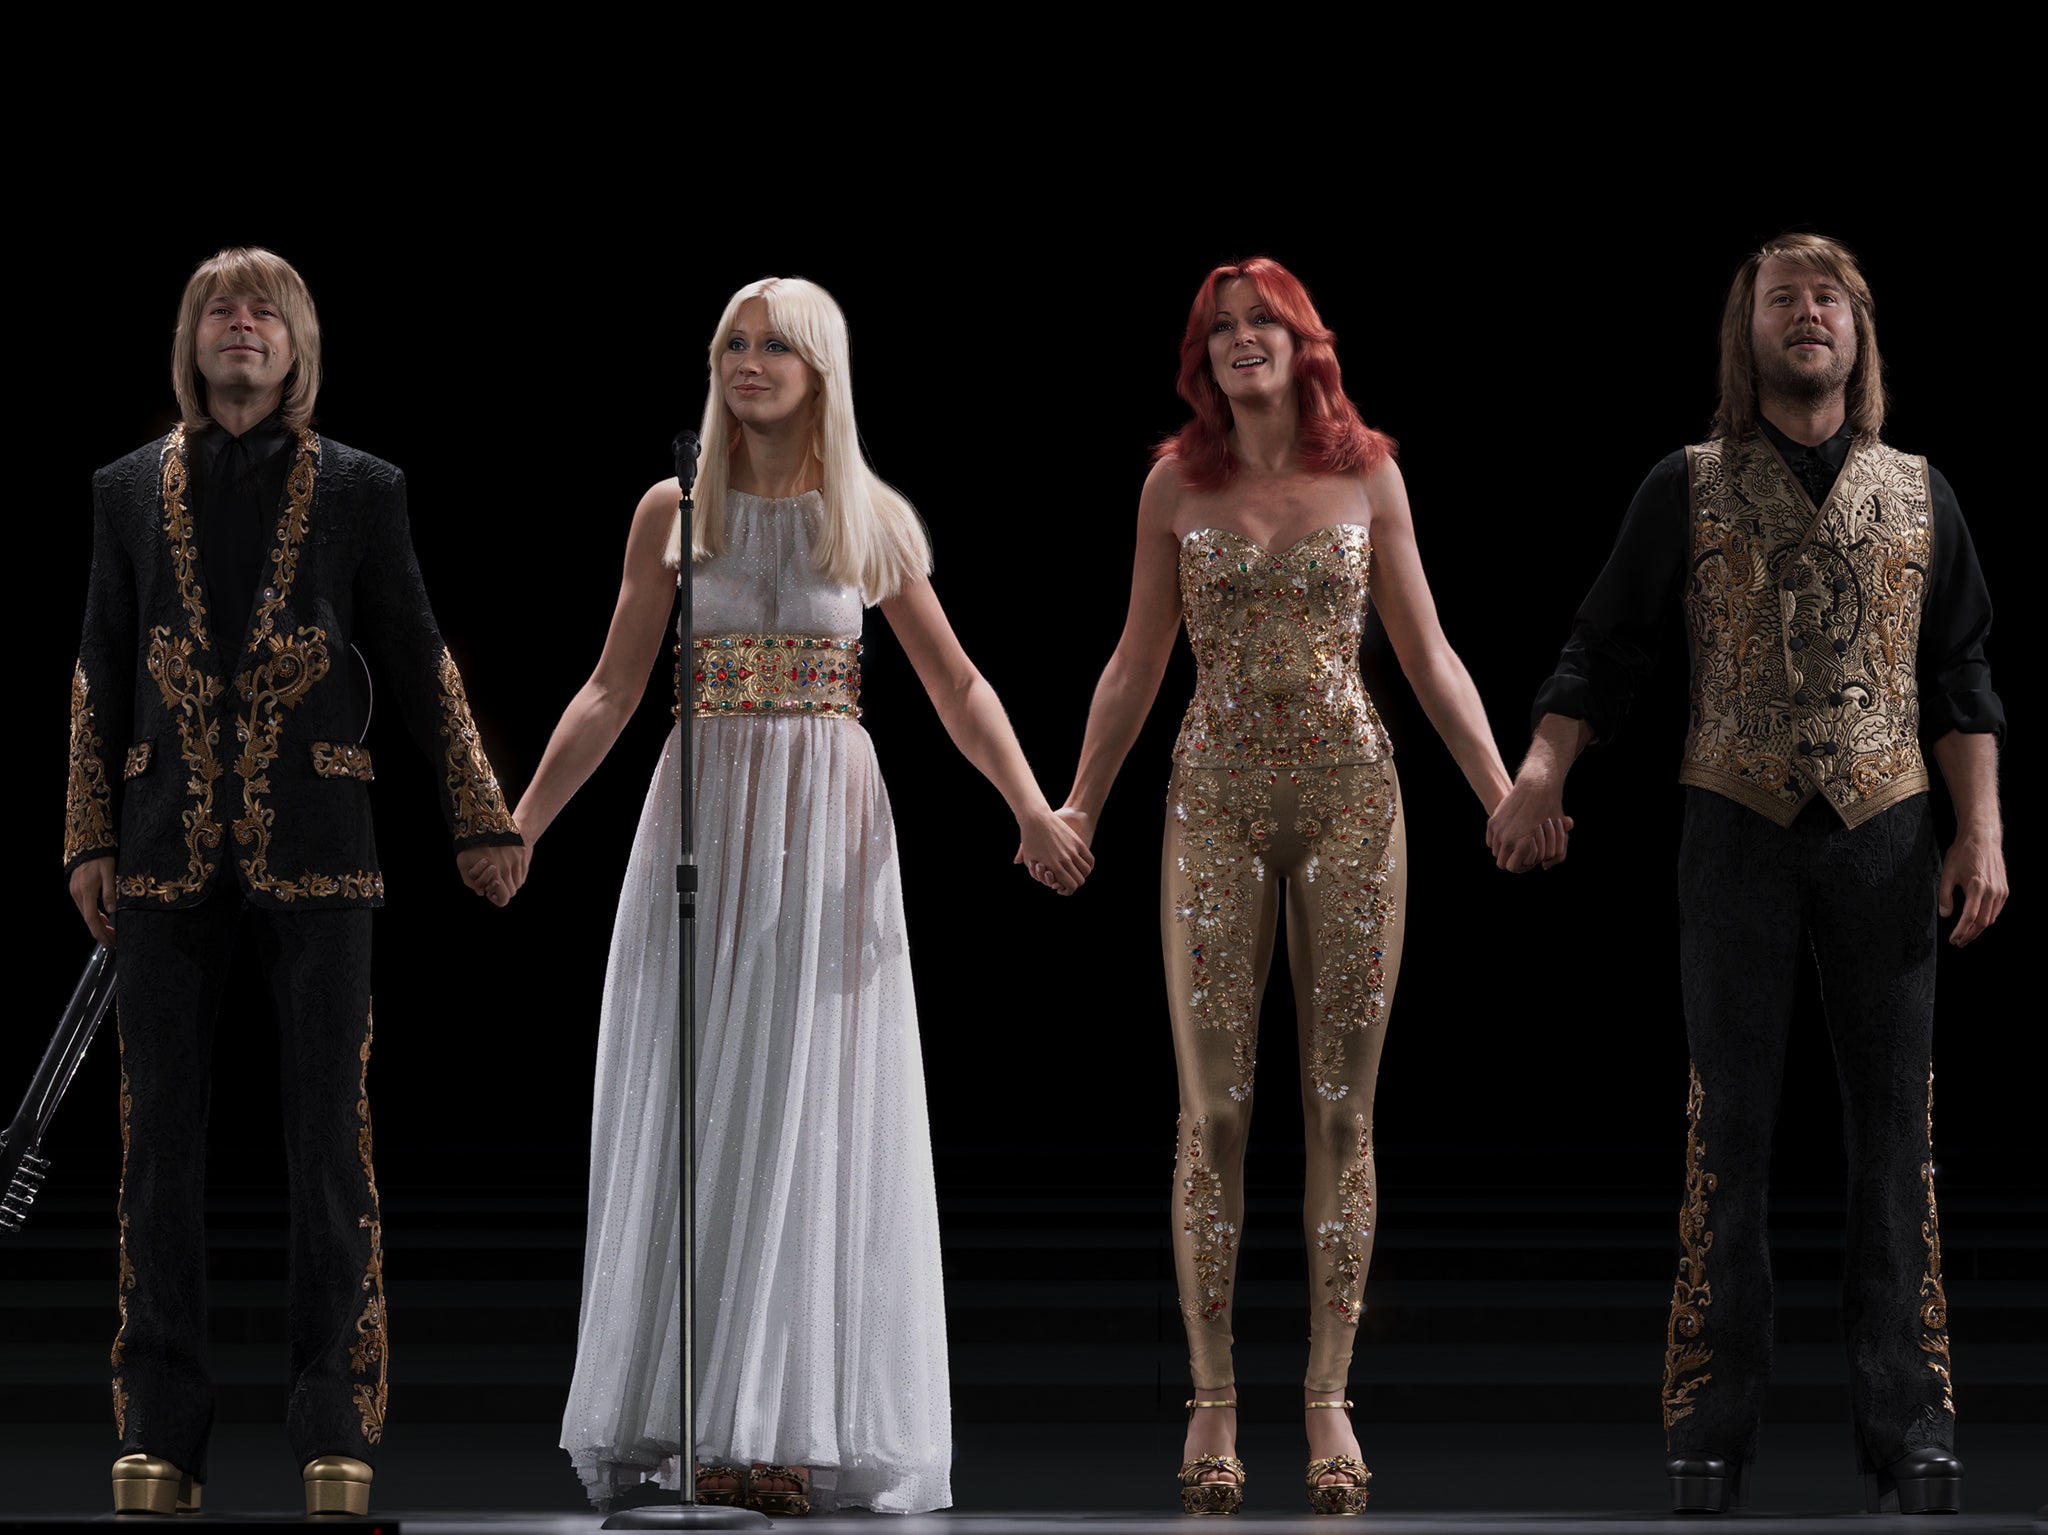 ABBA reunited in holographic form